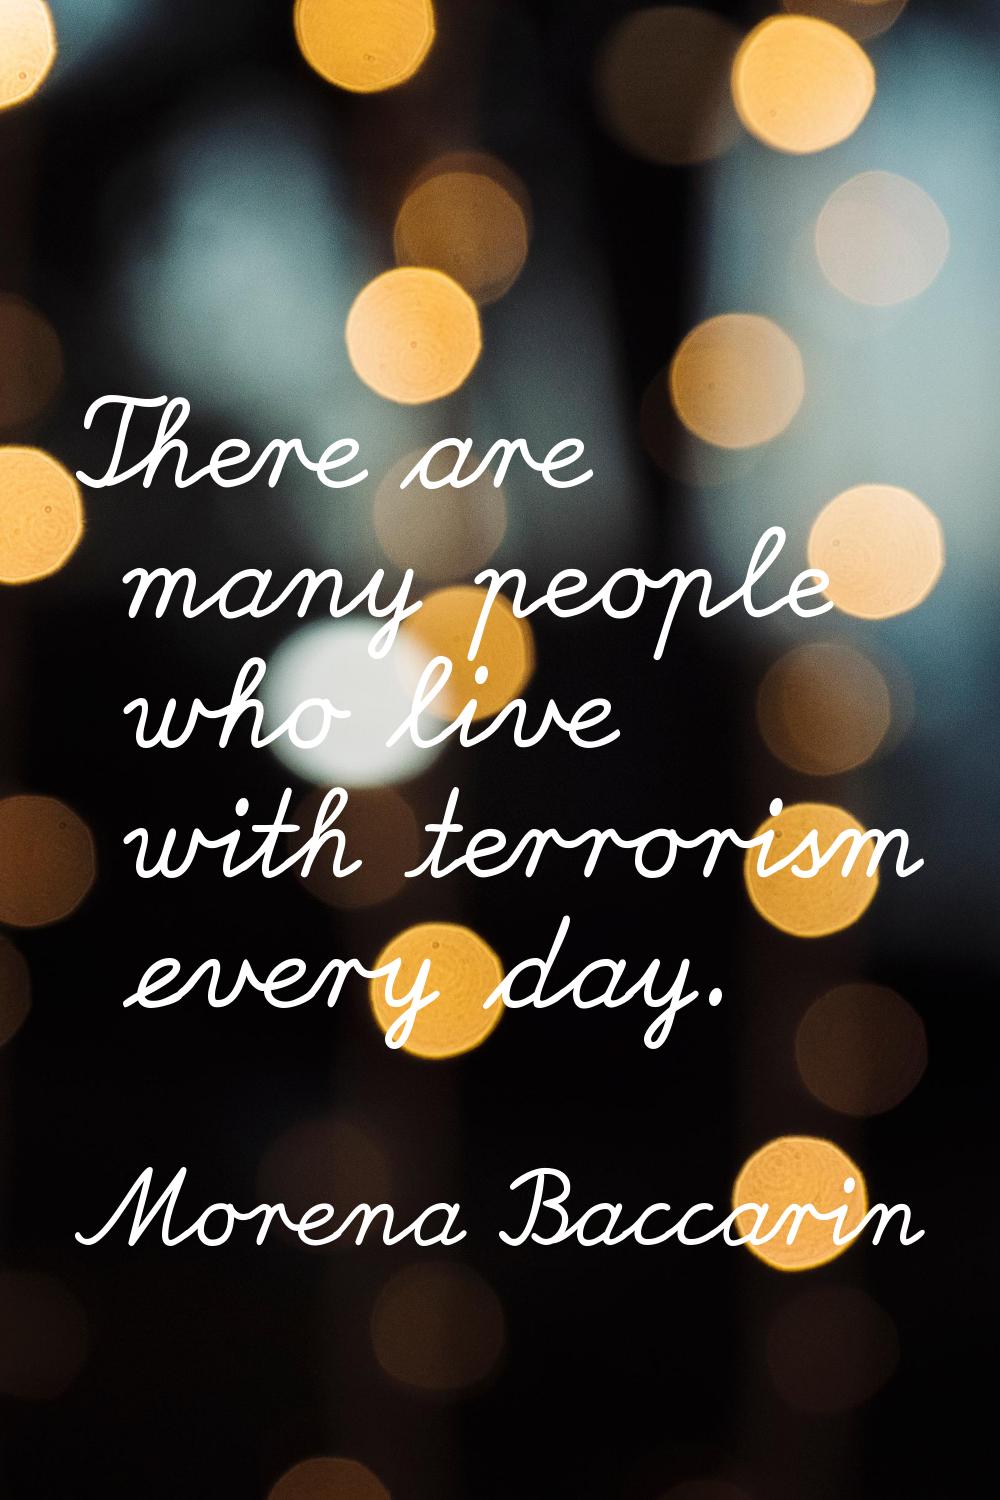 There are many people who live with terrorism every day.